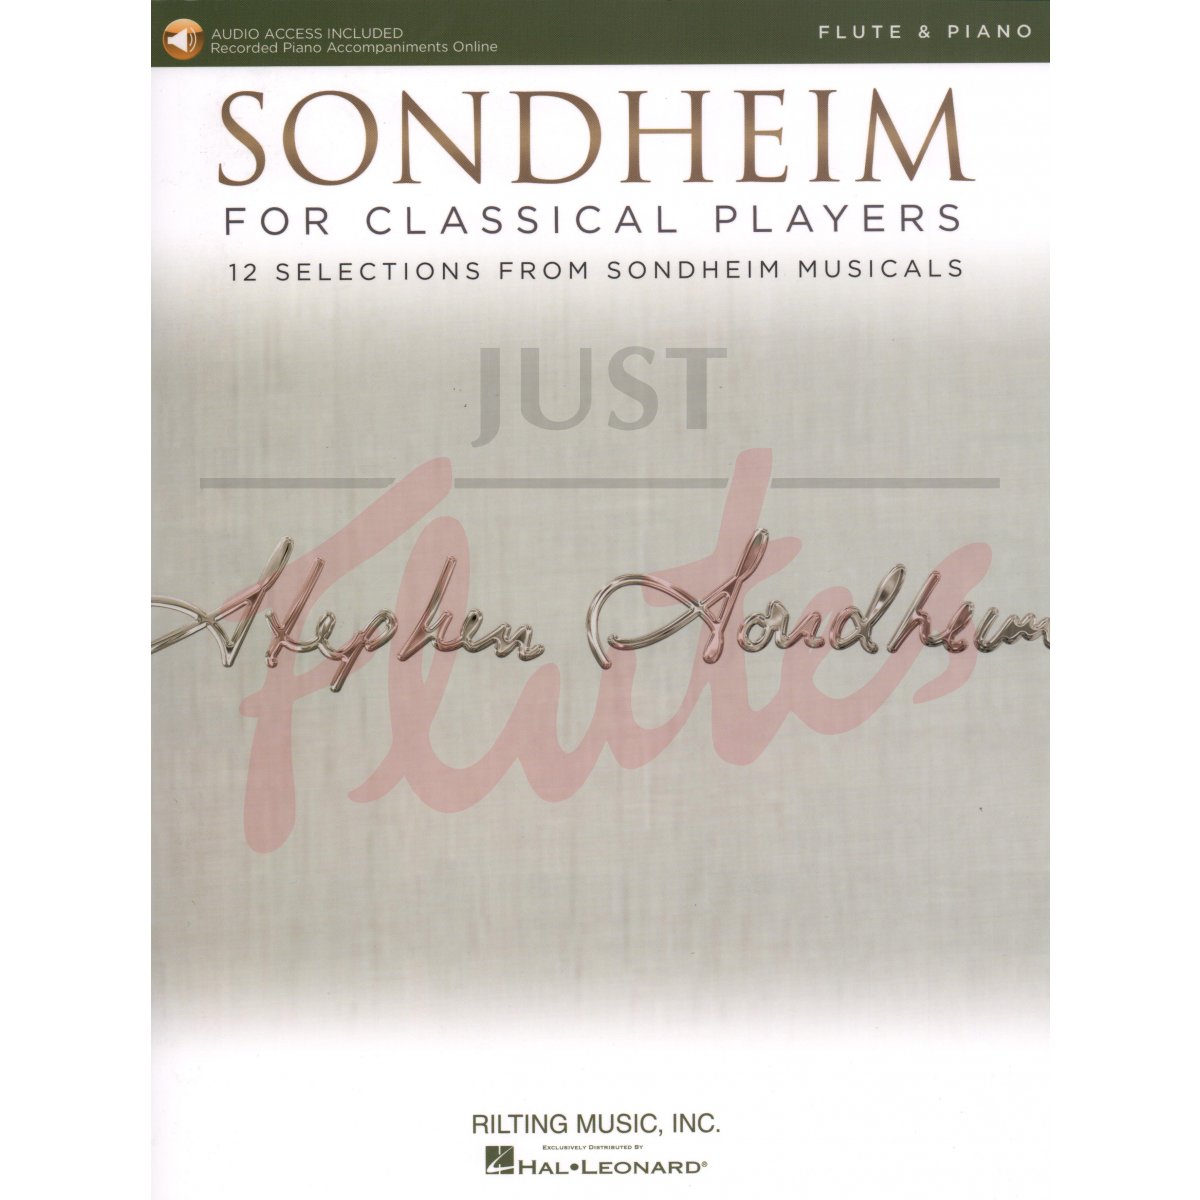 Sondheim for Classical Players [Flute and Piano]